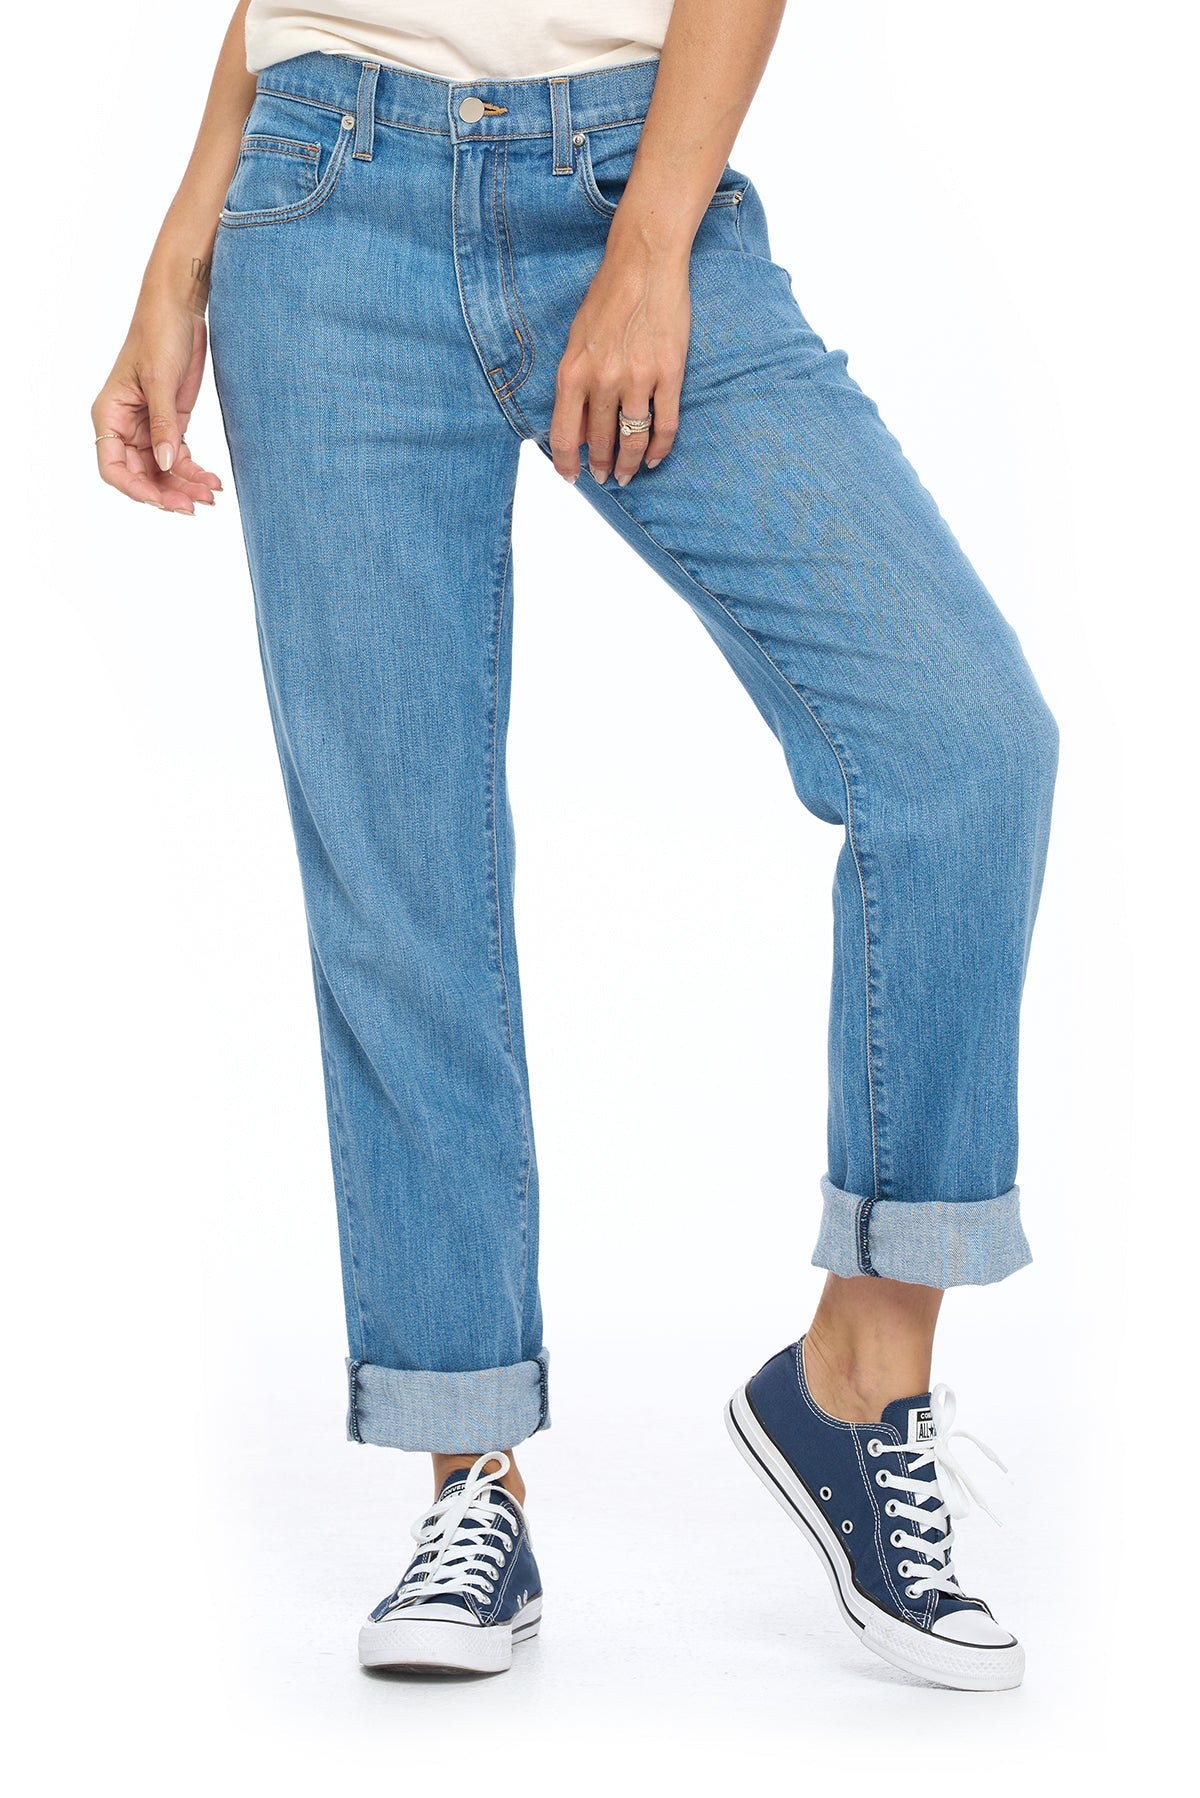 Women's travel jeans by Aviator in the Relaxed Boyfriend style in faded indigo color